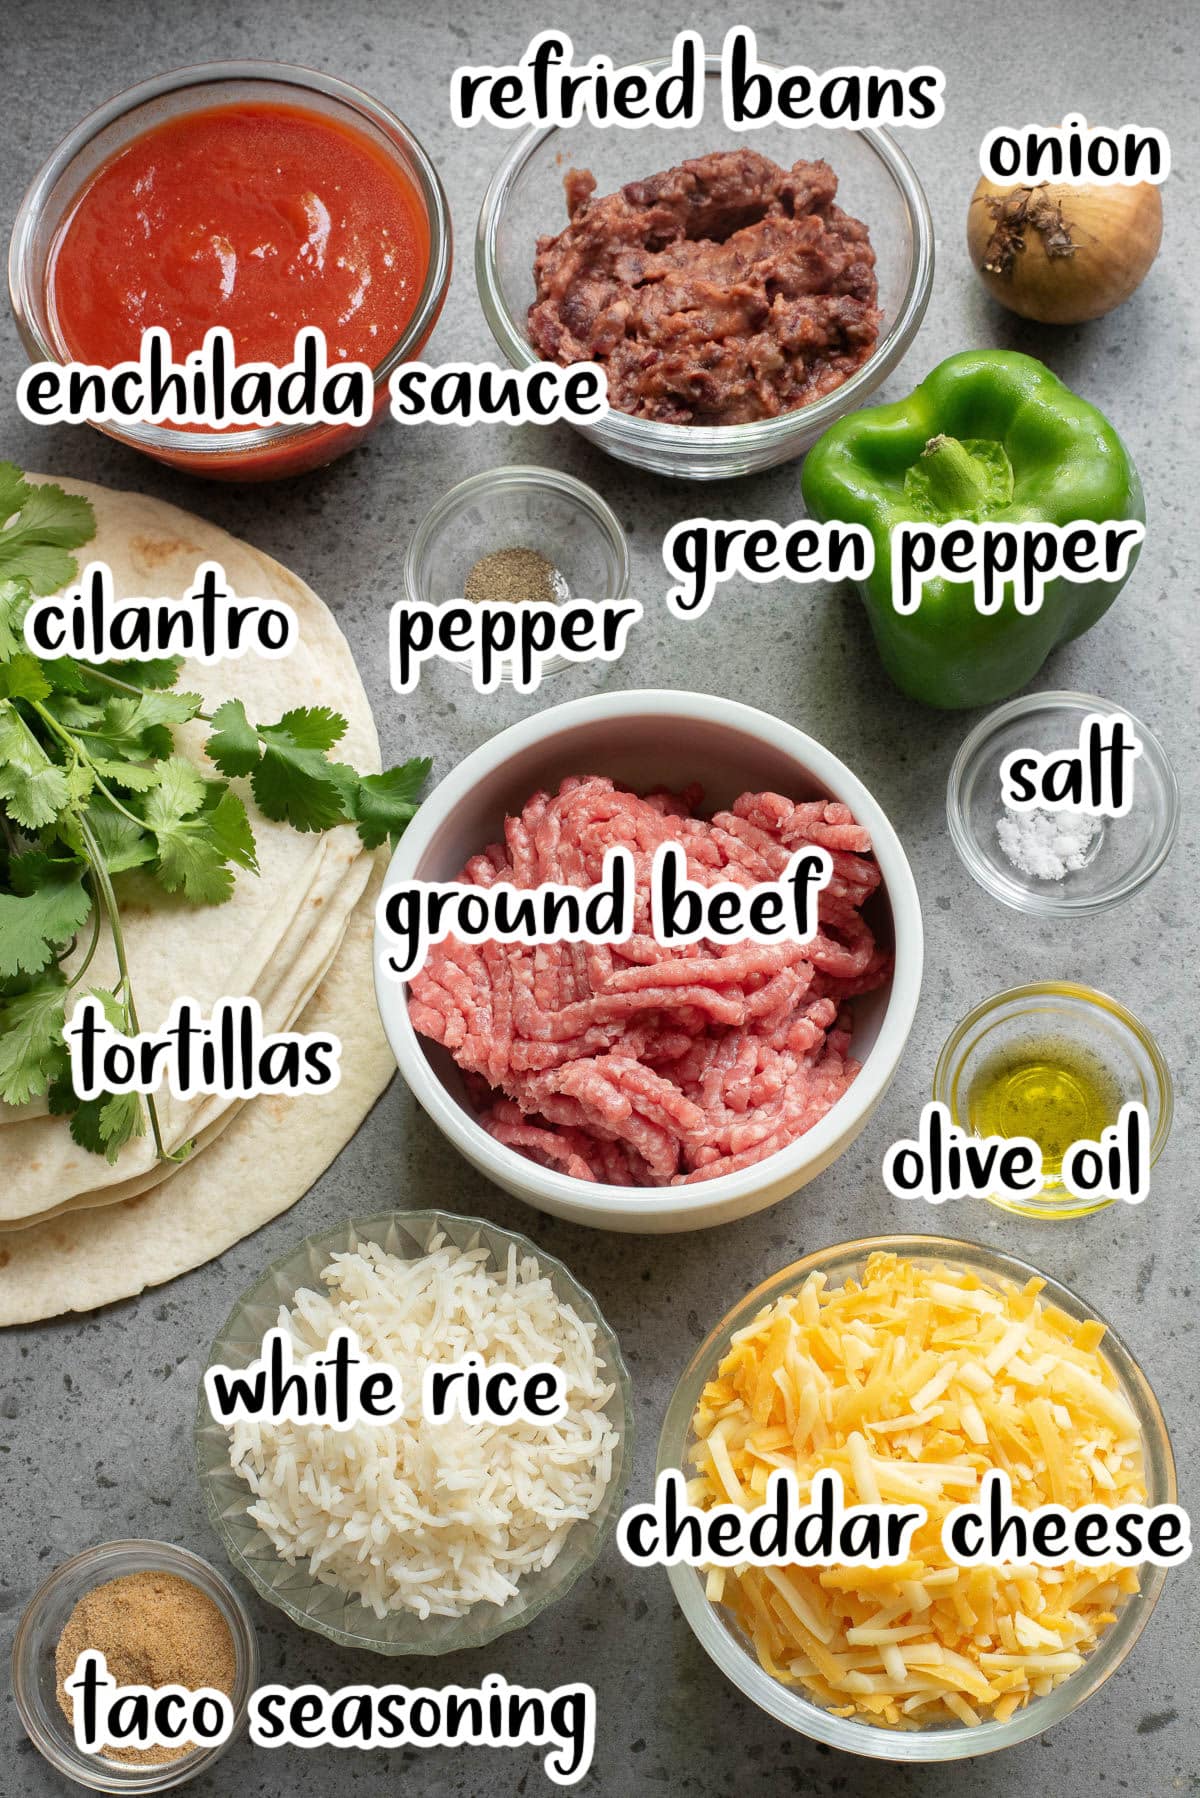 Labeled ingredients for burritos.